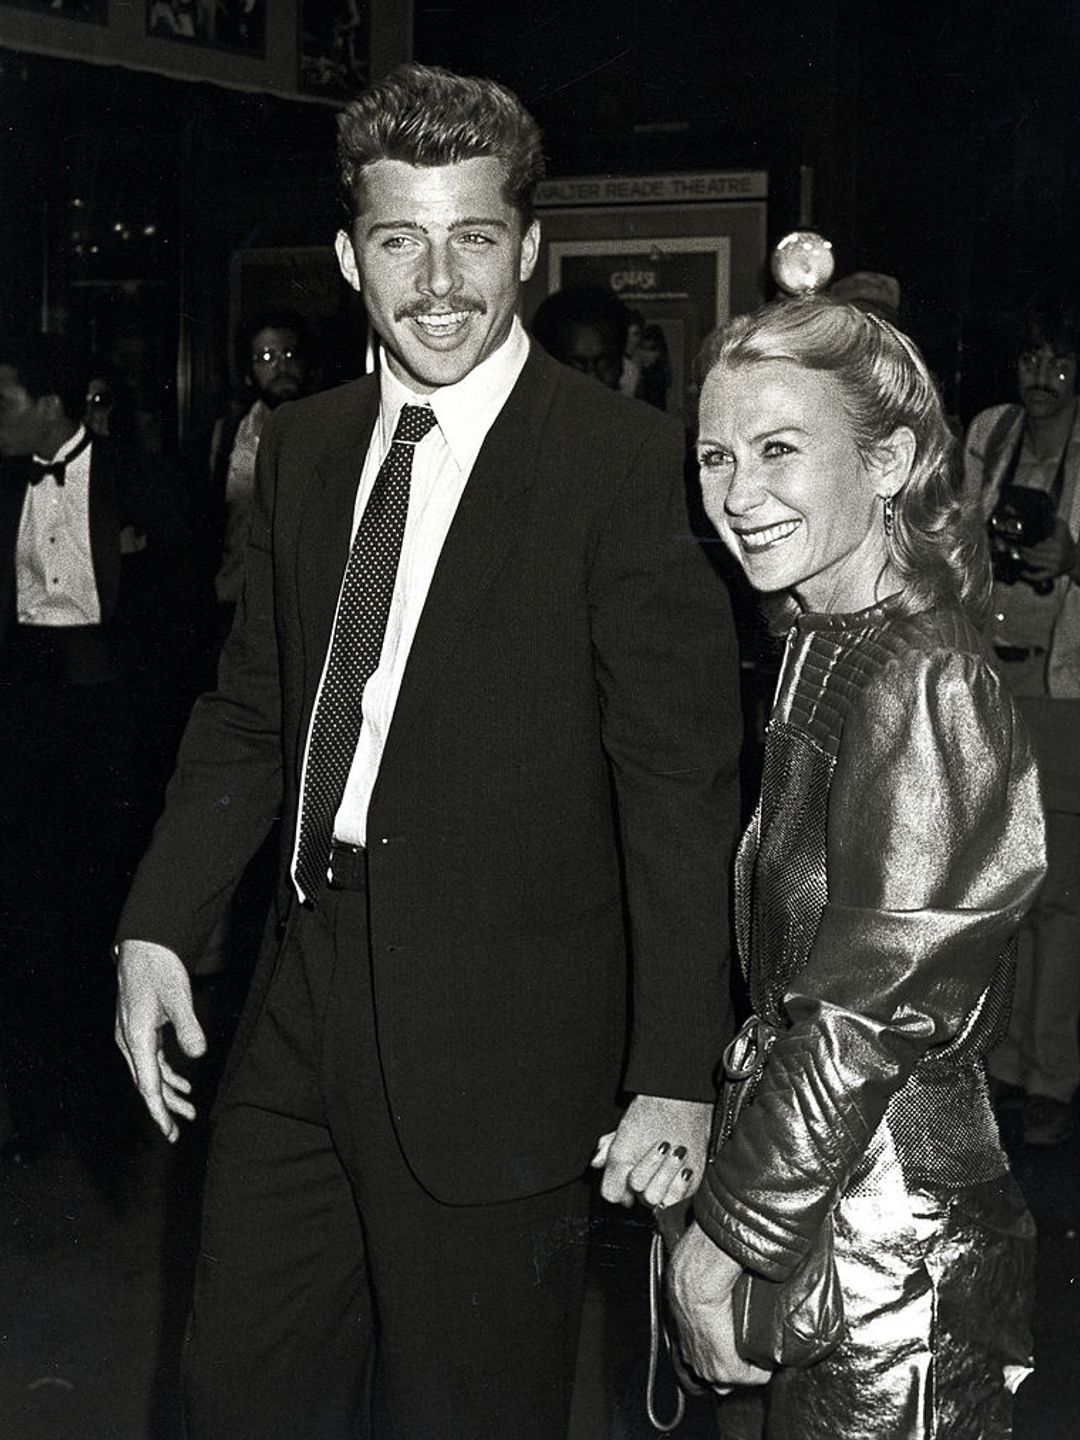 Maxwell Caulfield in a suit and Juliet Mills wearing a metallic dress at the "Grease II" New York Premiere